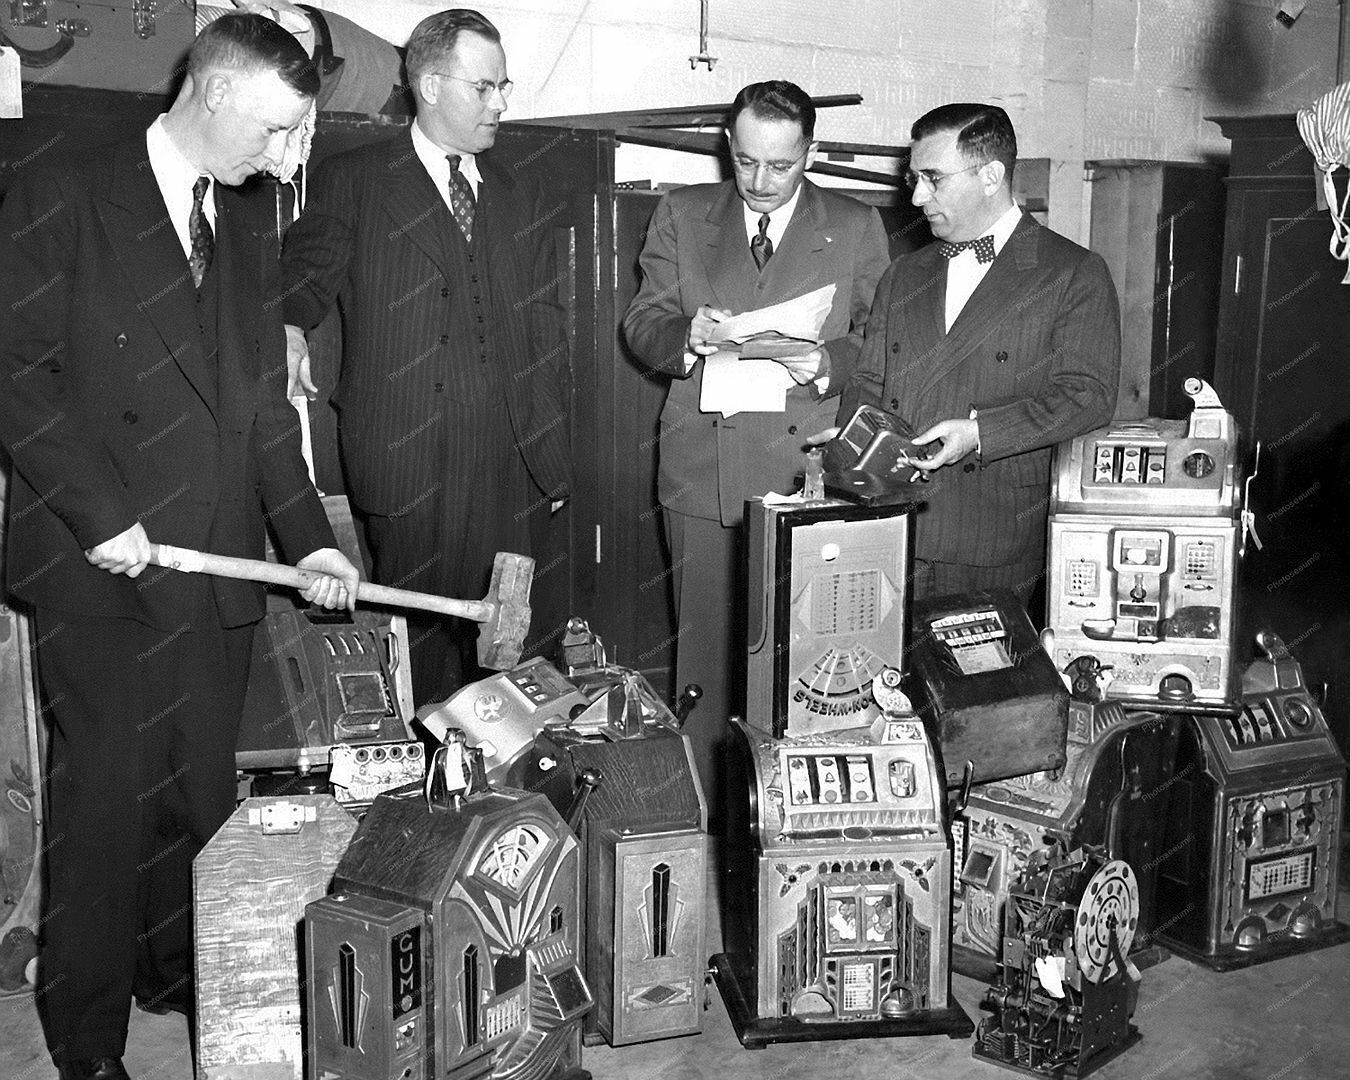 Slot Machines Confiscated & Counted For Destruction 8x10 Reprint Of Old Photo